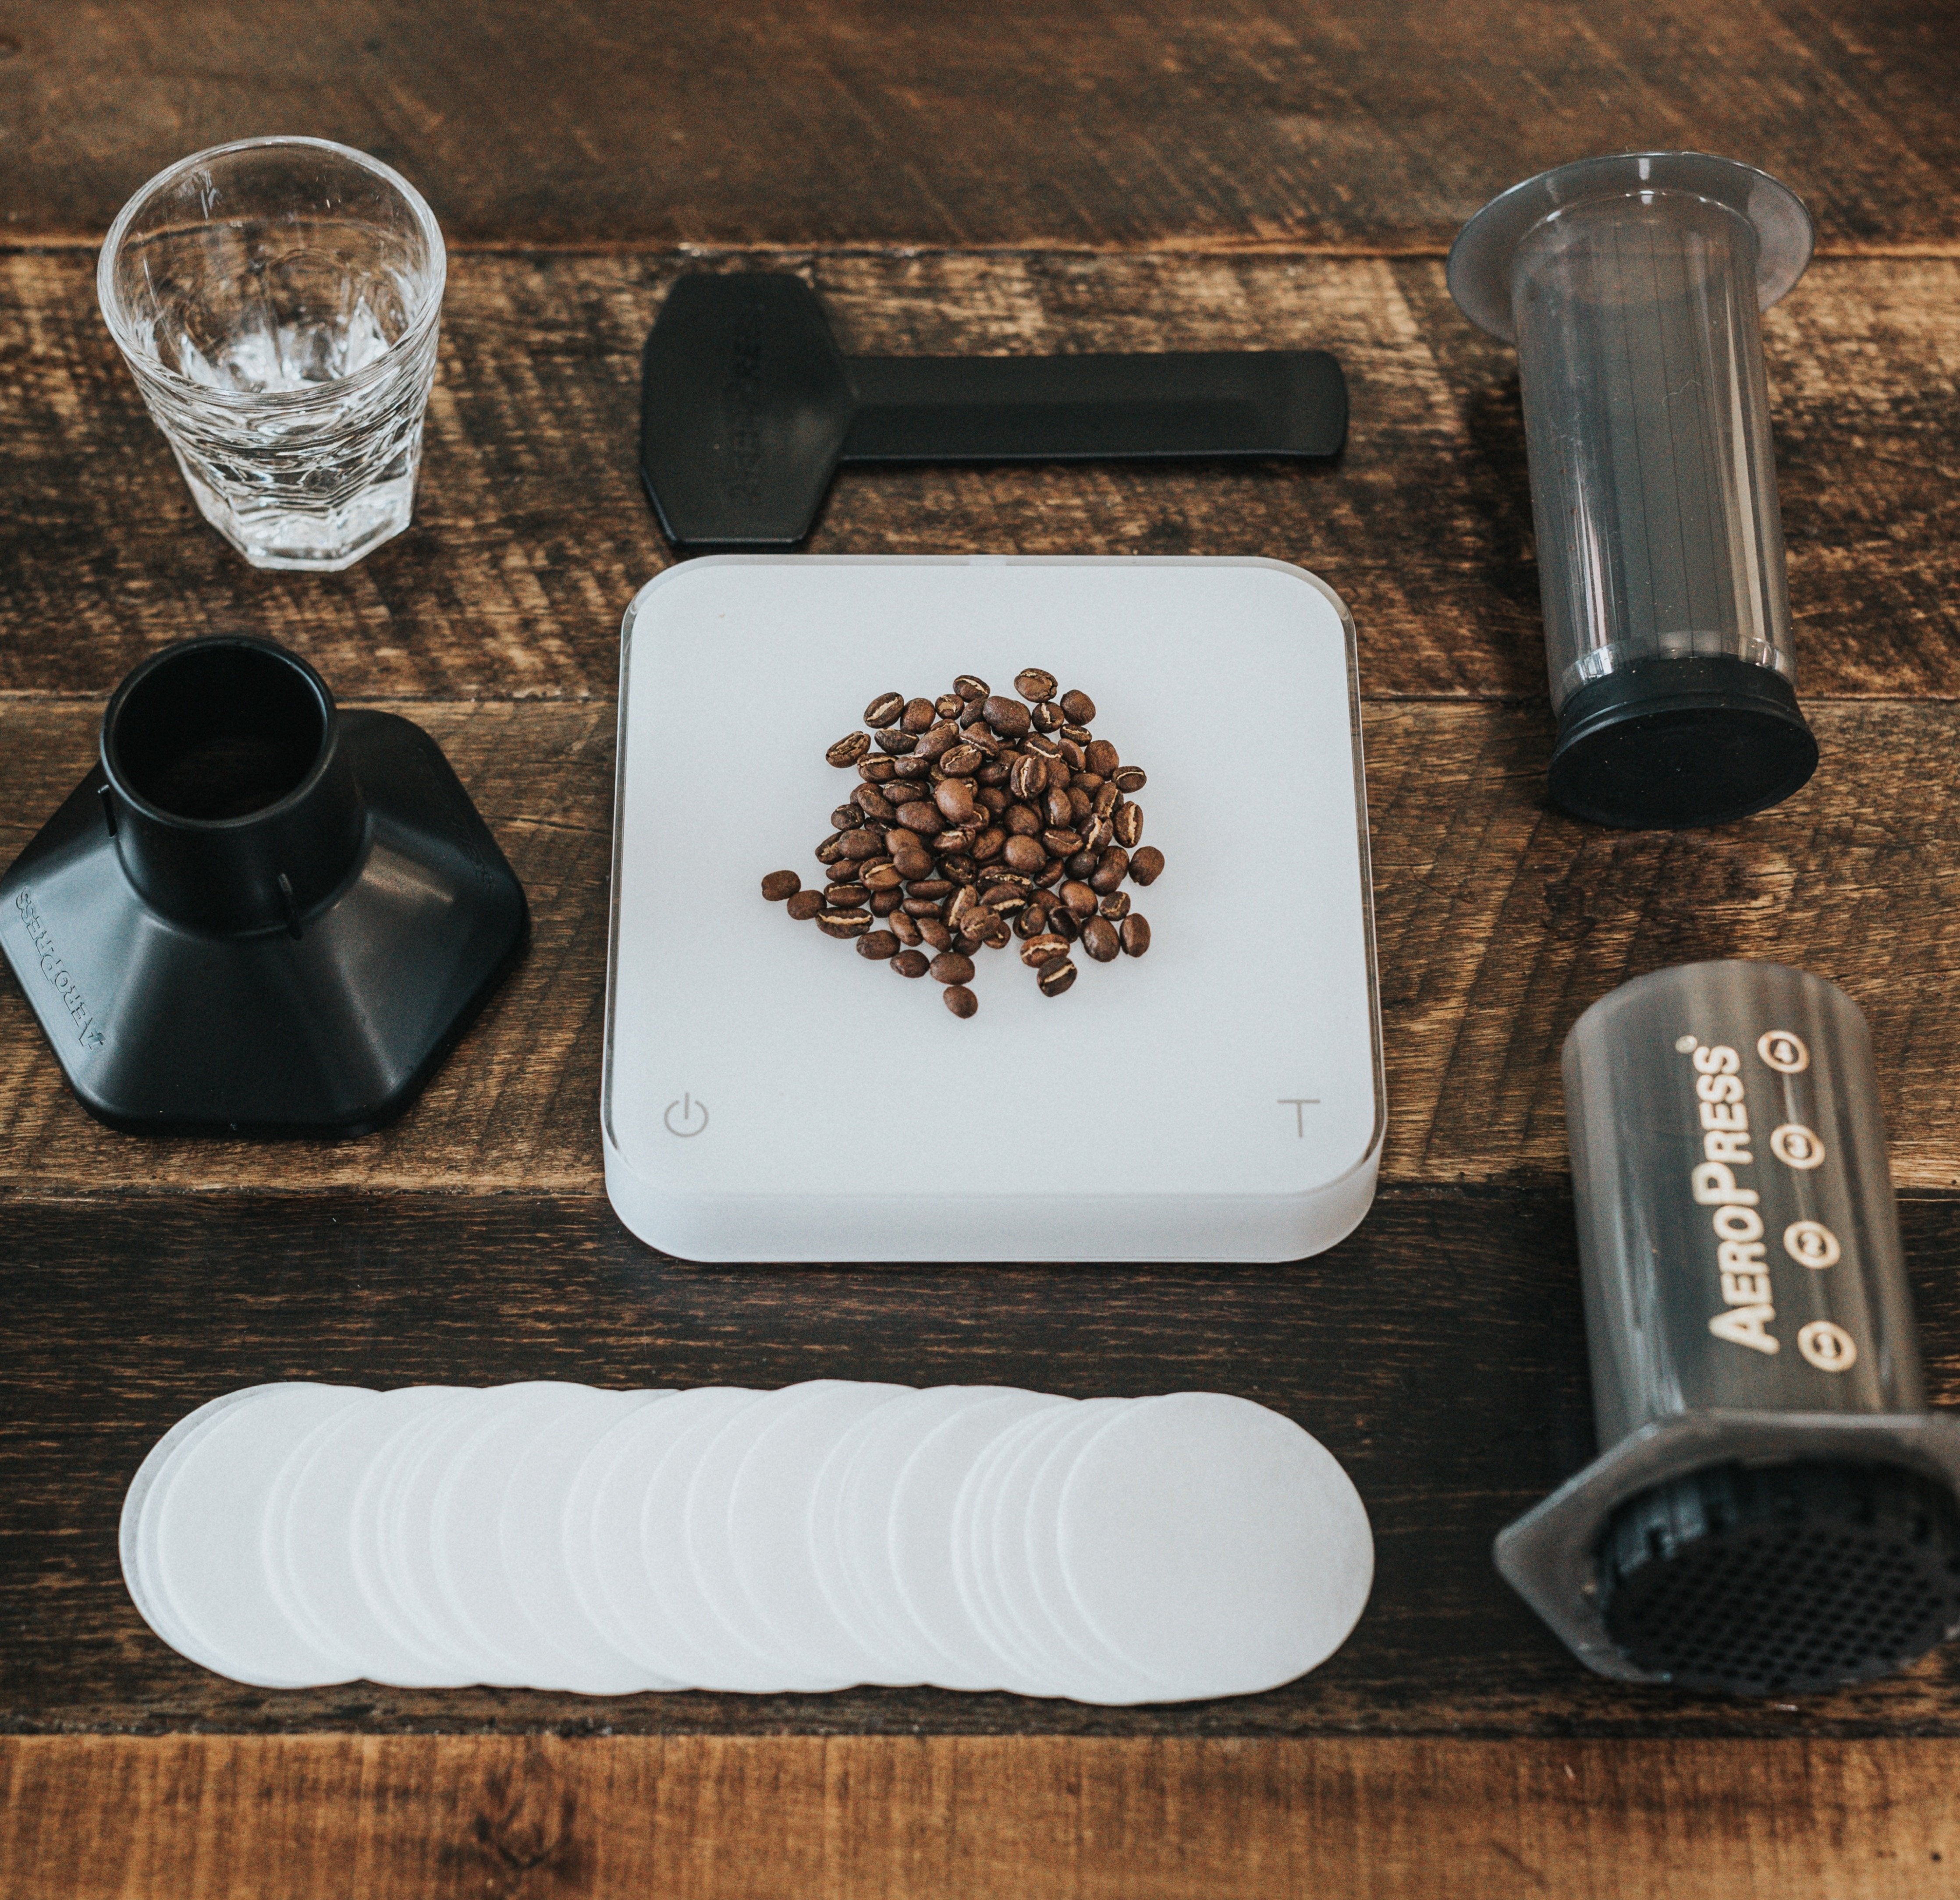 A portable Aeropress set, a glass of water, and Acaia scale with some coffee beans on top.